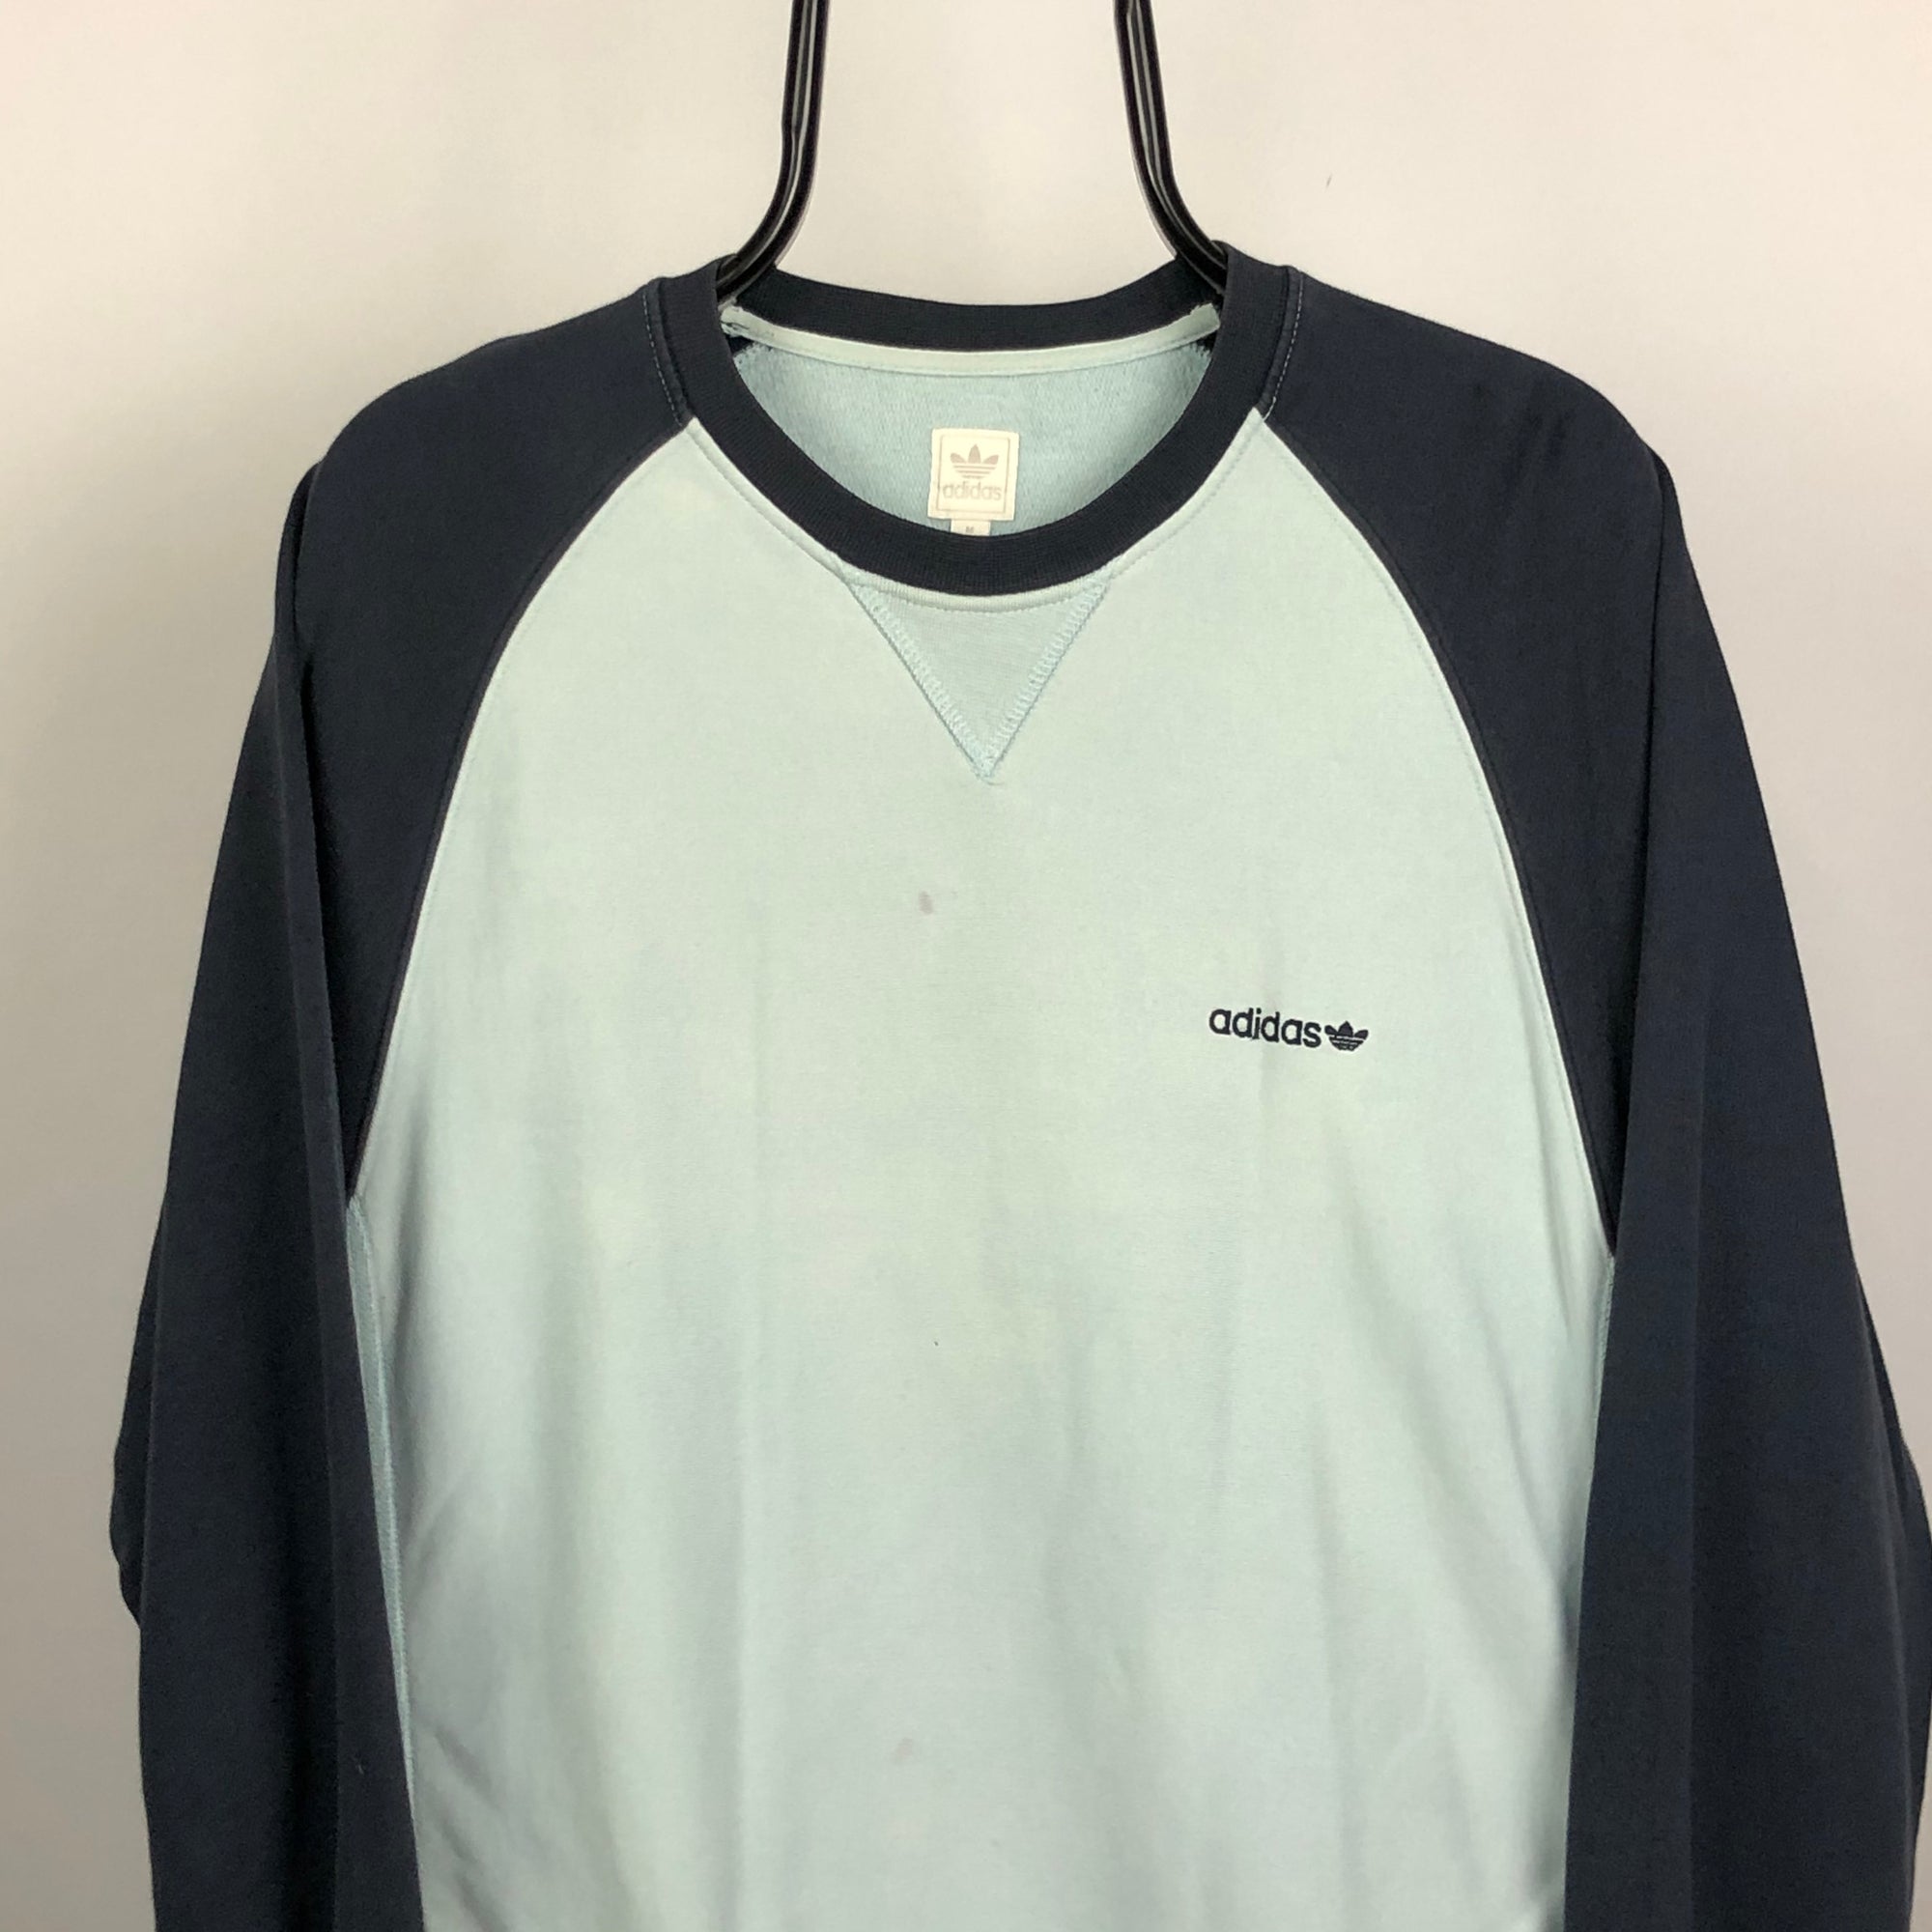 Adidas Embroidered Small Spellout Sweatshirt in Baby Blue/Navy - Men's Medium/Women's Large